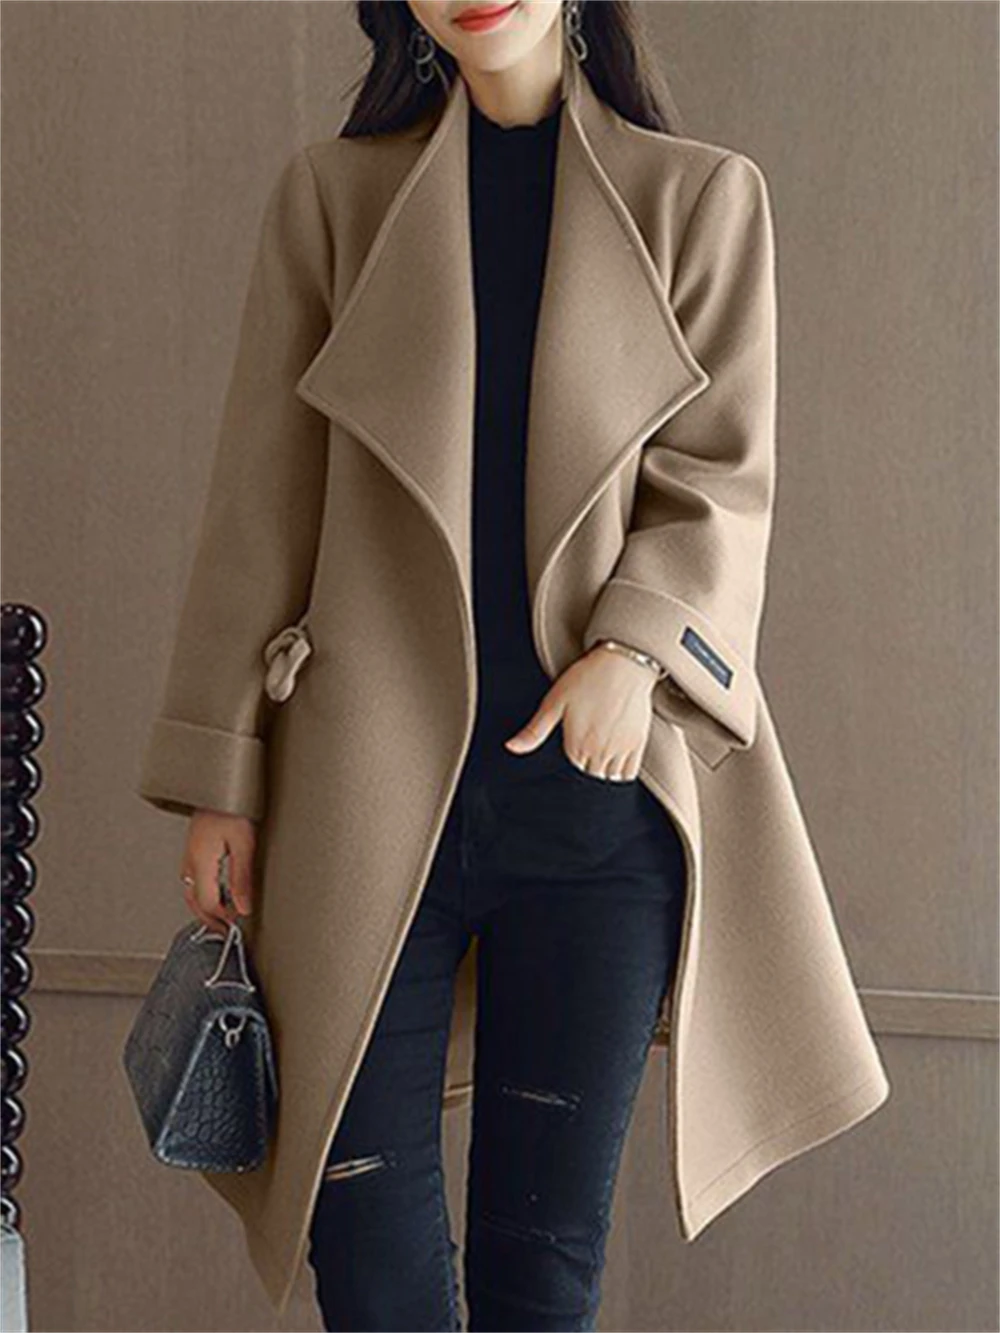 

Charmingtrend Autumn Winter Women Coat Fashion All-match Solid Color Woolen Coat Thick Casual Coat Ladies Outwear Loose Jacket